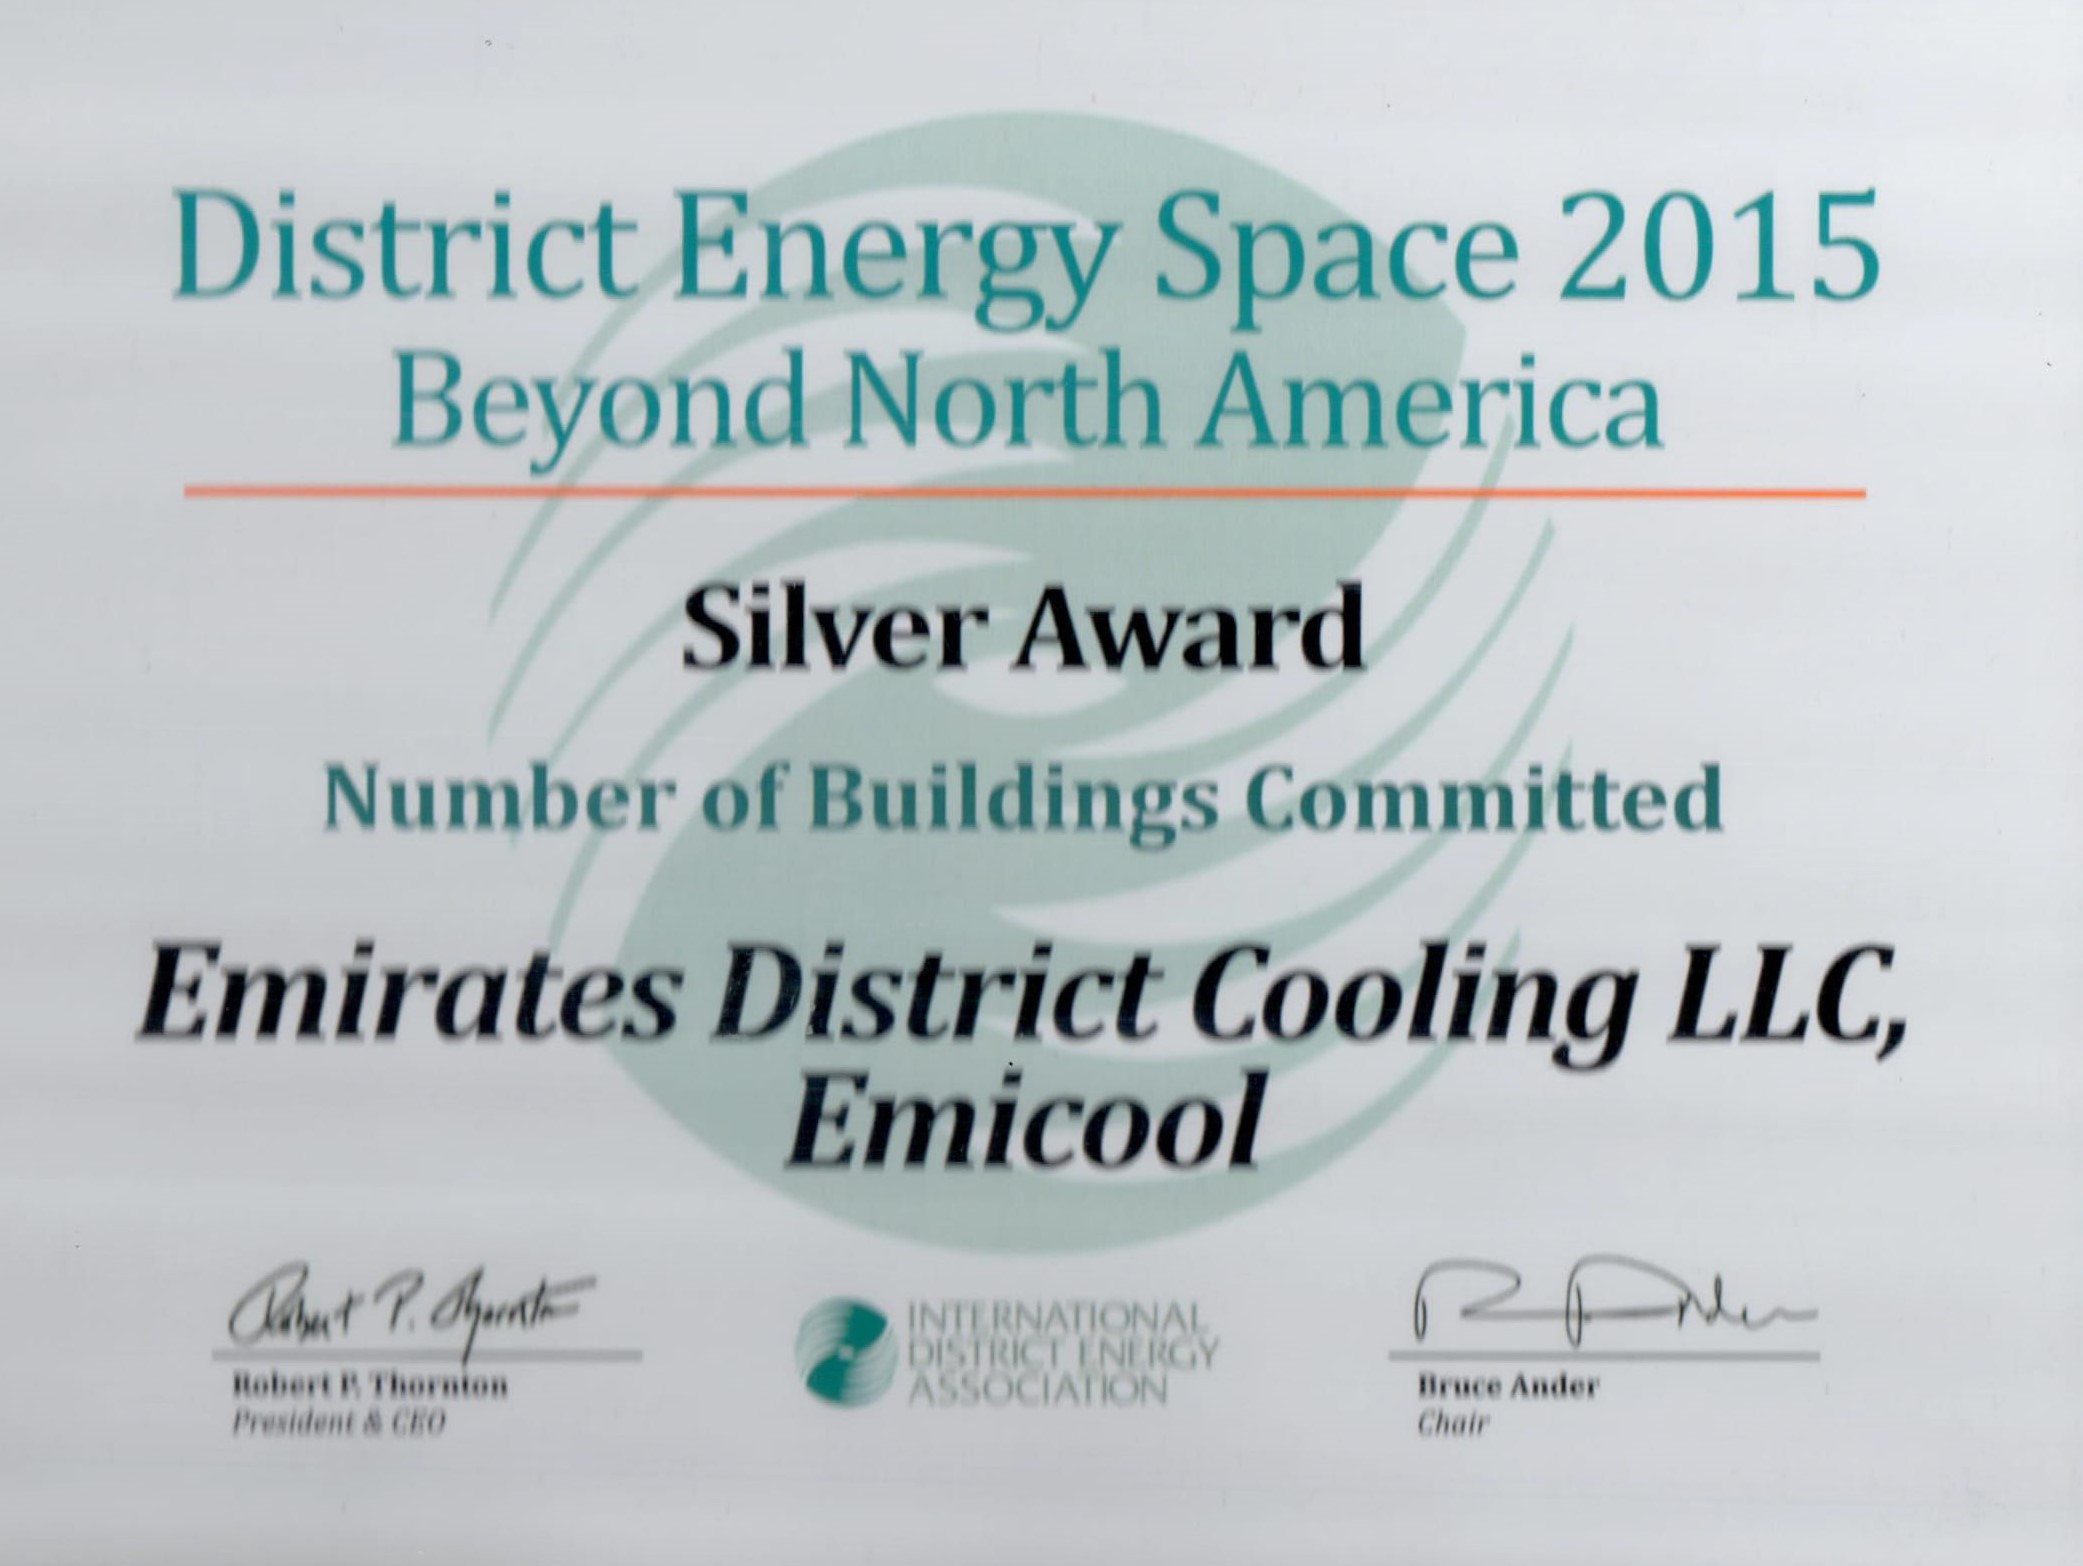 Silver Award Number of Buildings Committed 